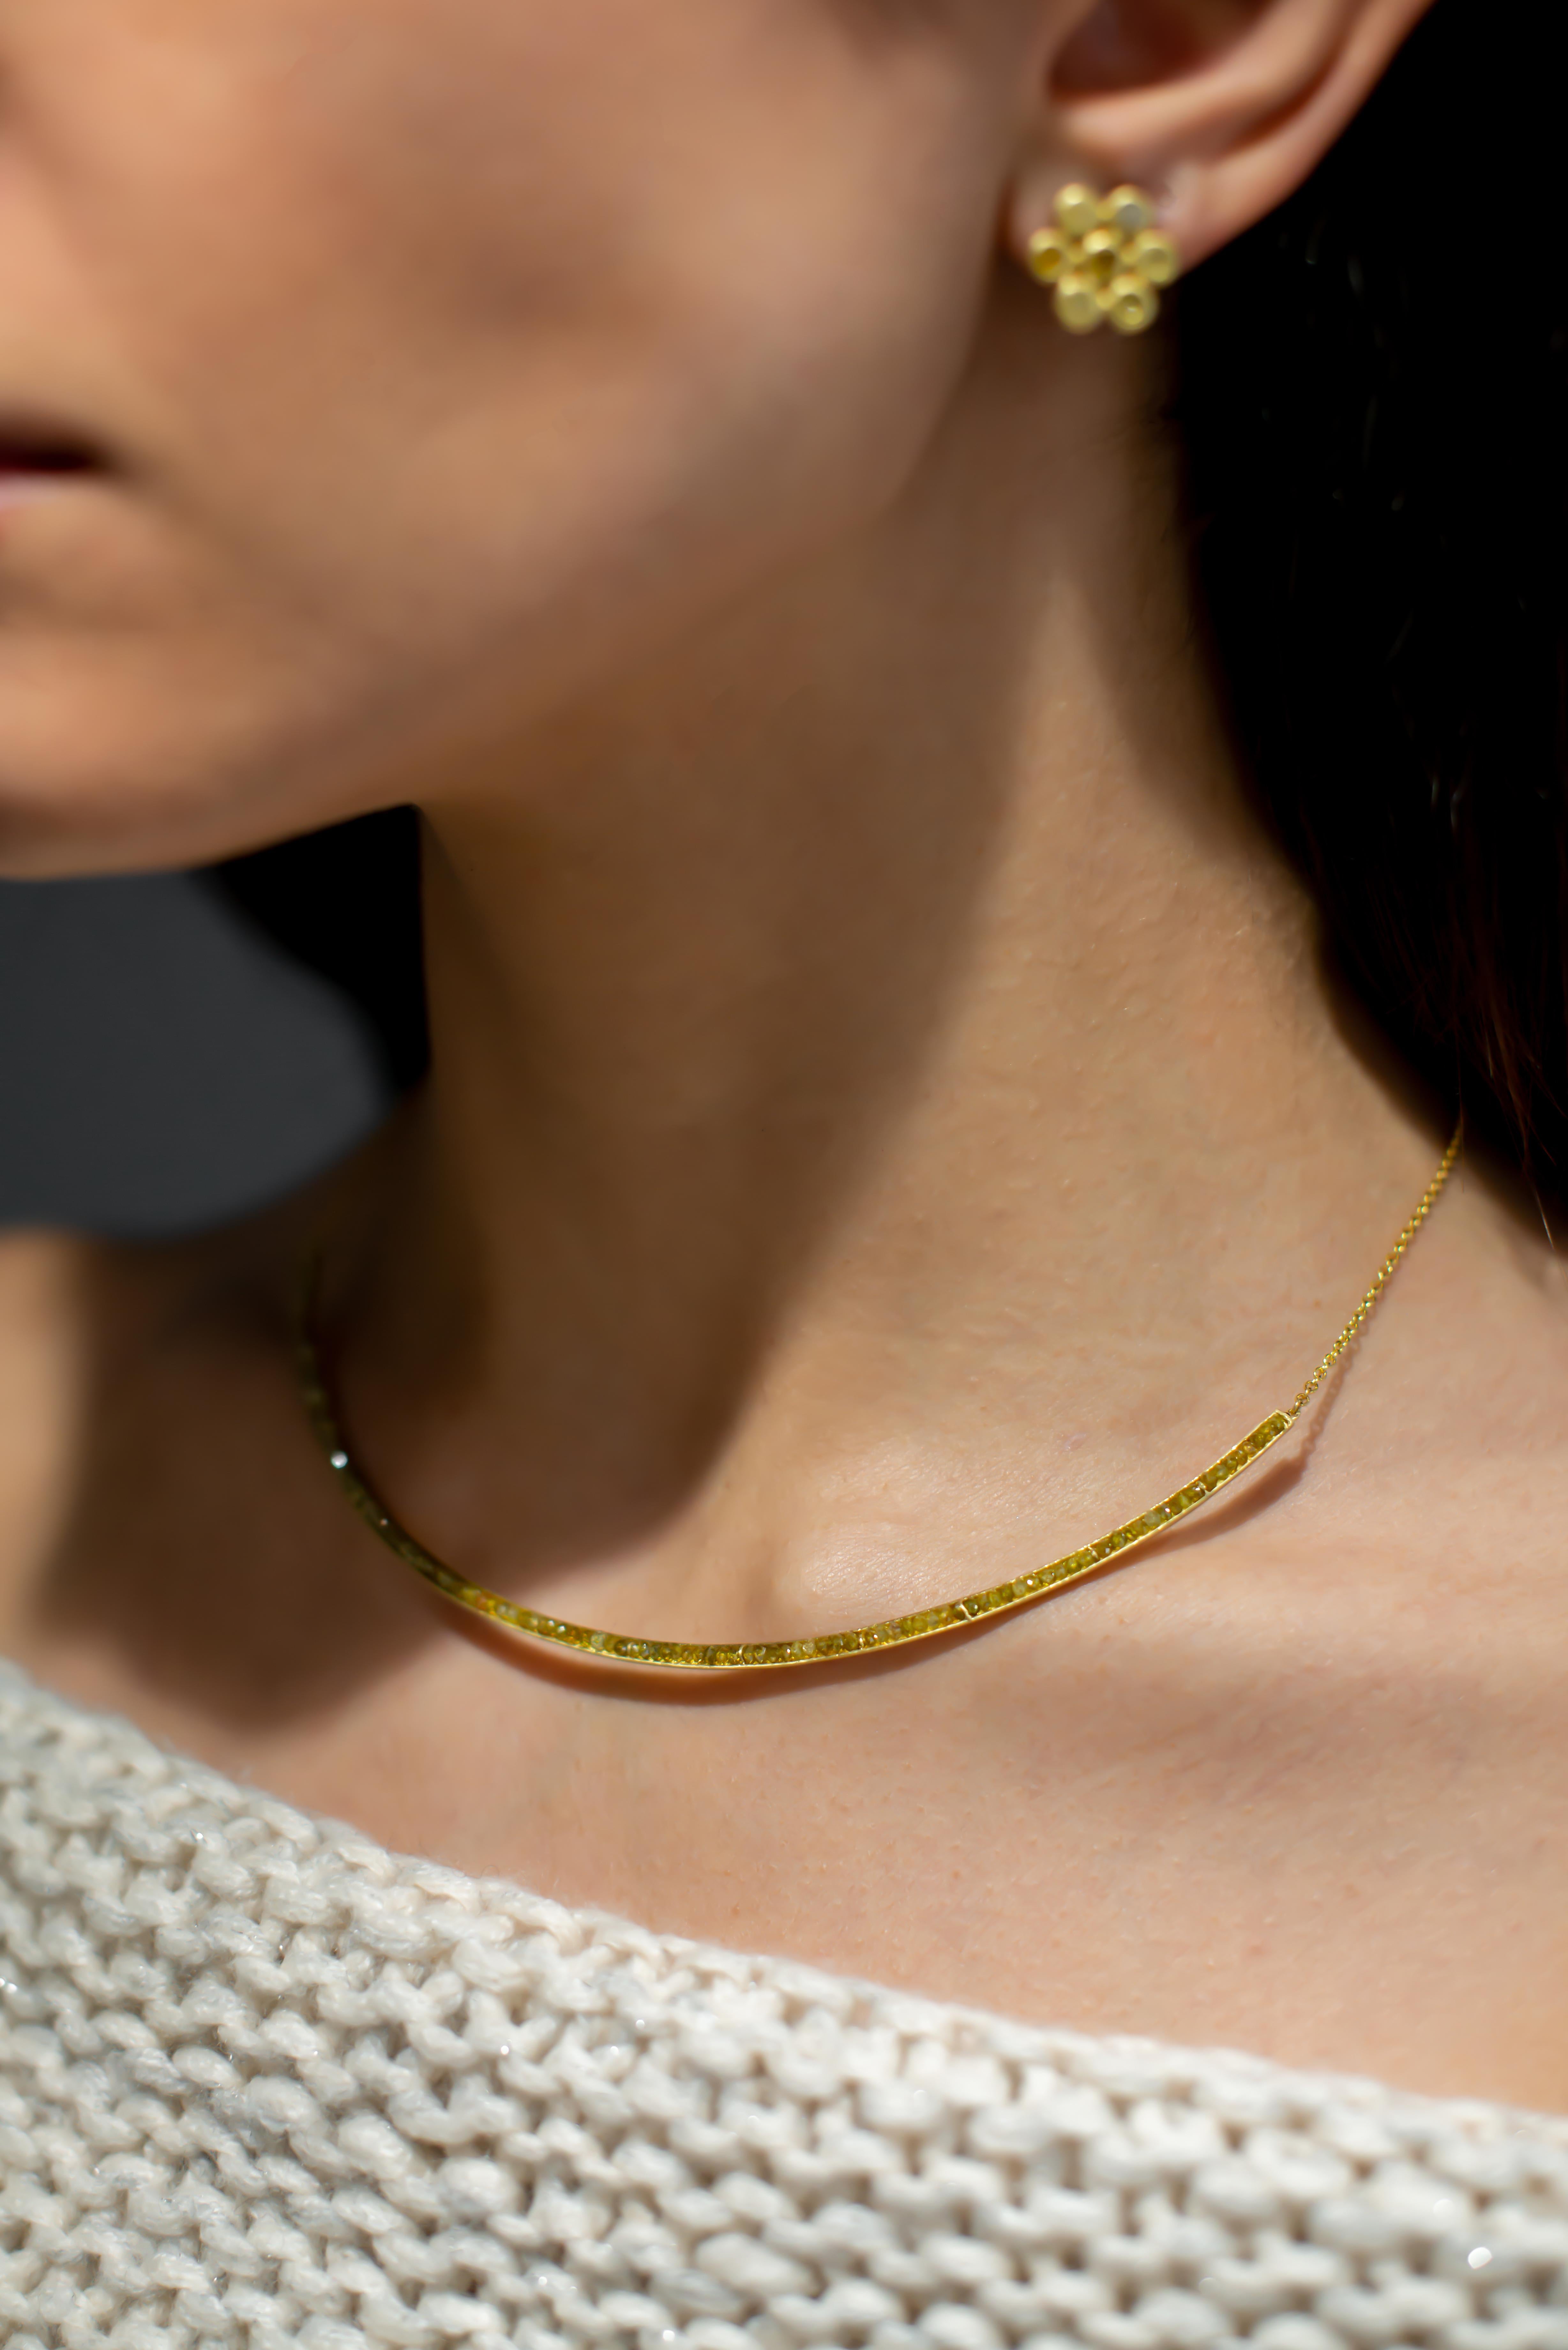 Feminine yet edgy, sleek yellow faceted raw diamonds are expertly channel set in 18k gold.
Gently curved for a flattering fit and finished with a cable link, adjustable chain. 
Matte-finished.
Necklace Length 15-16.5